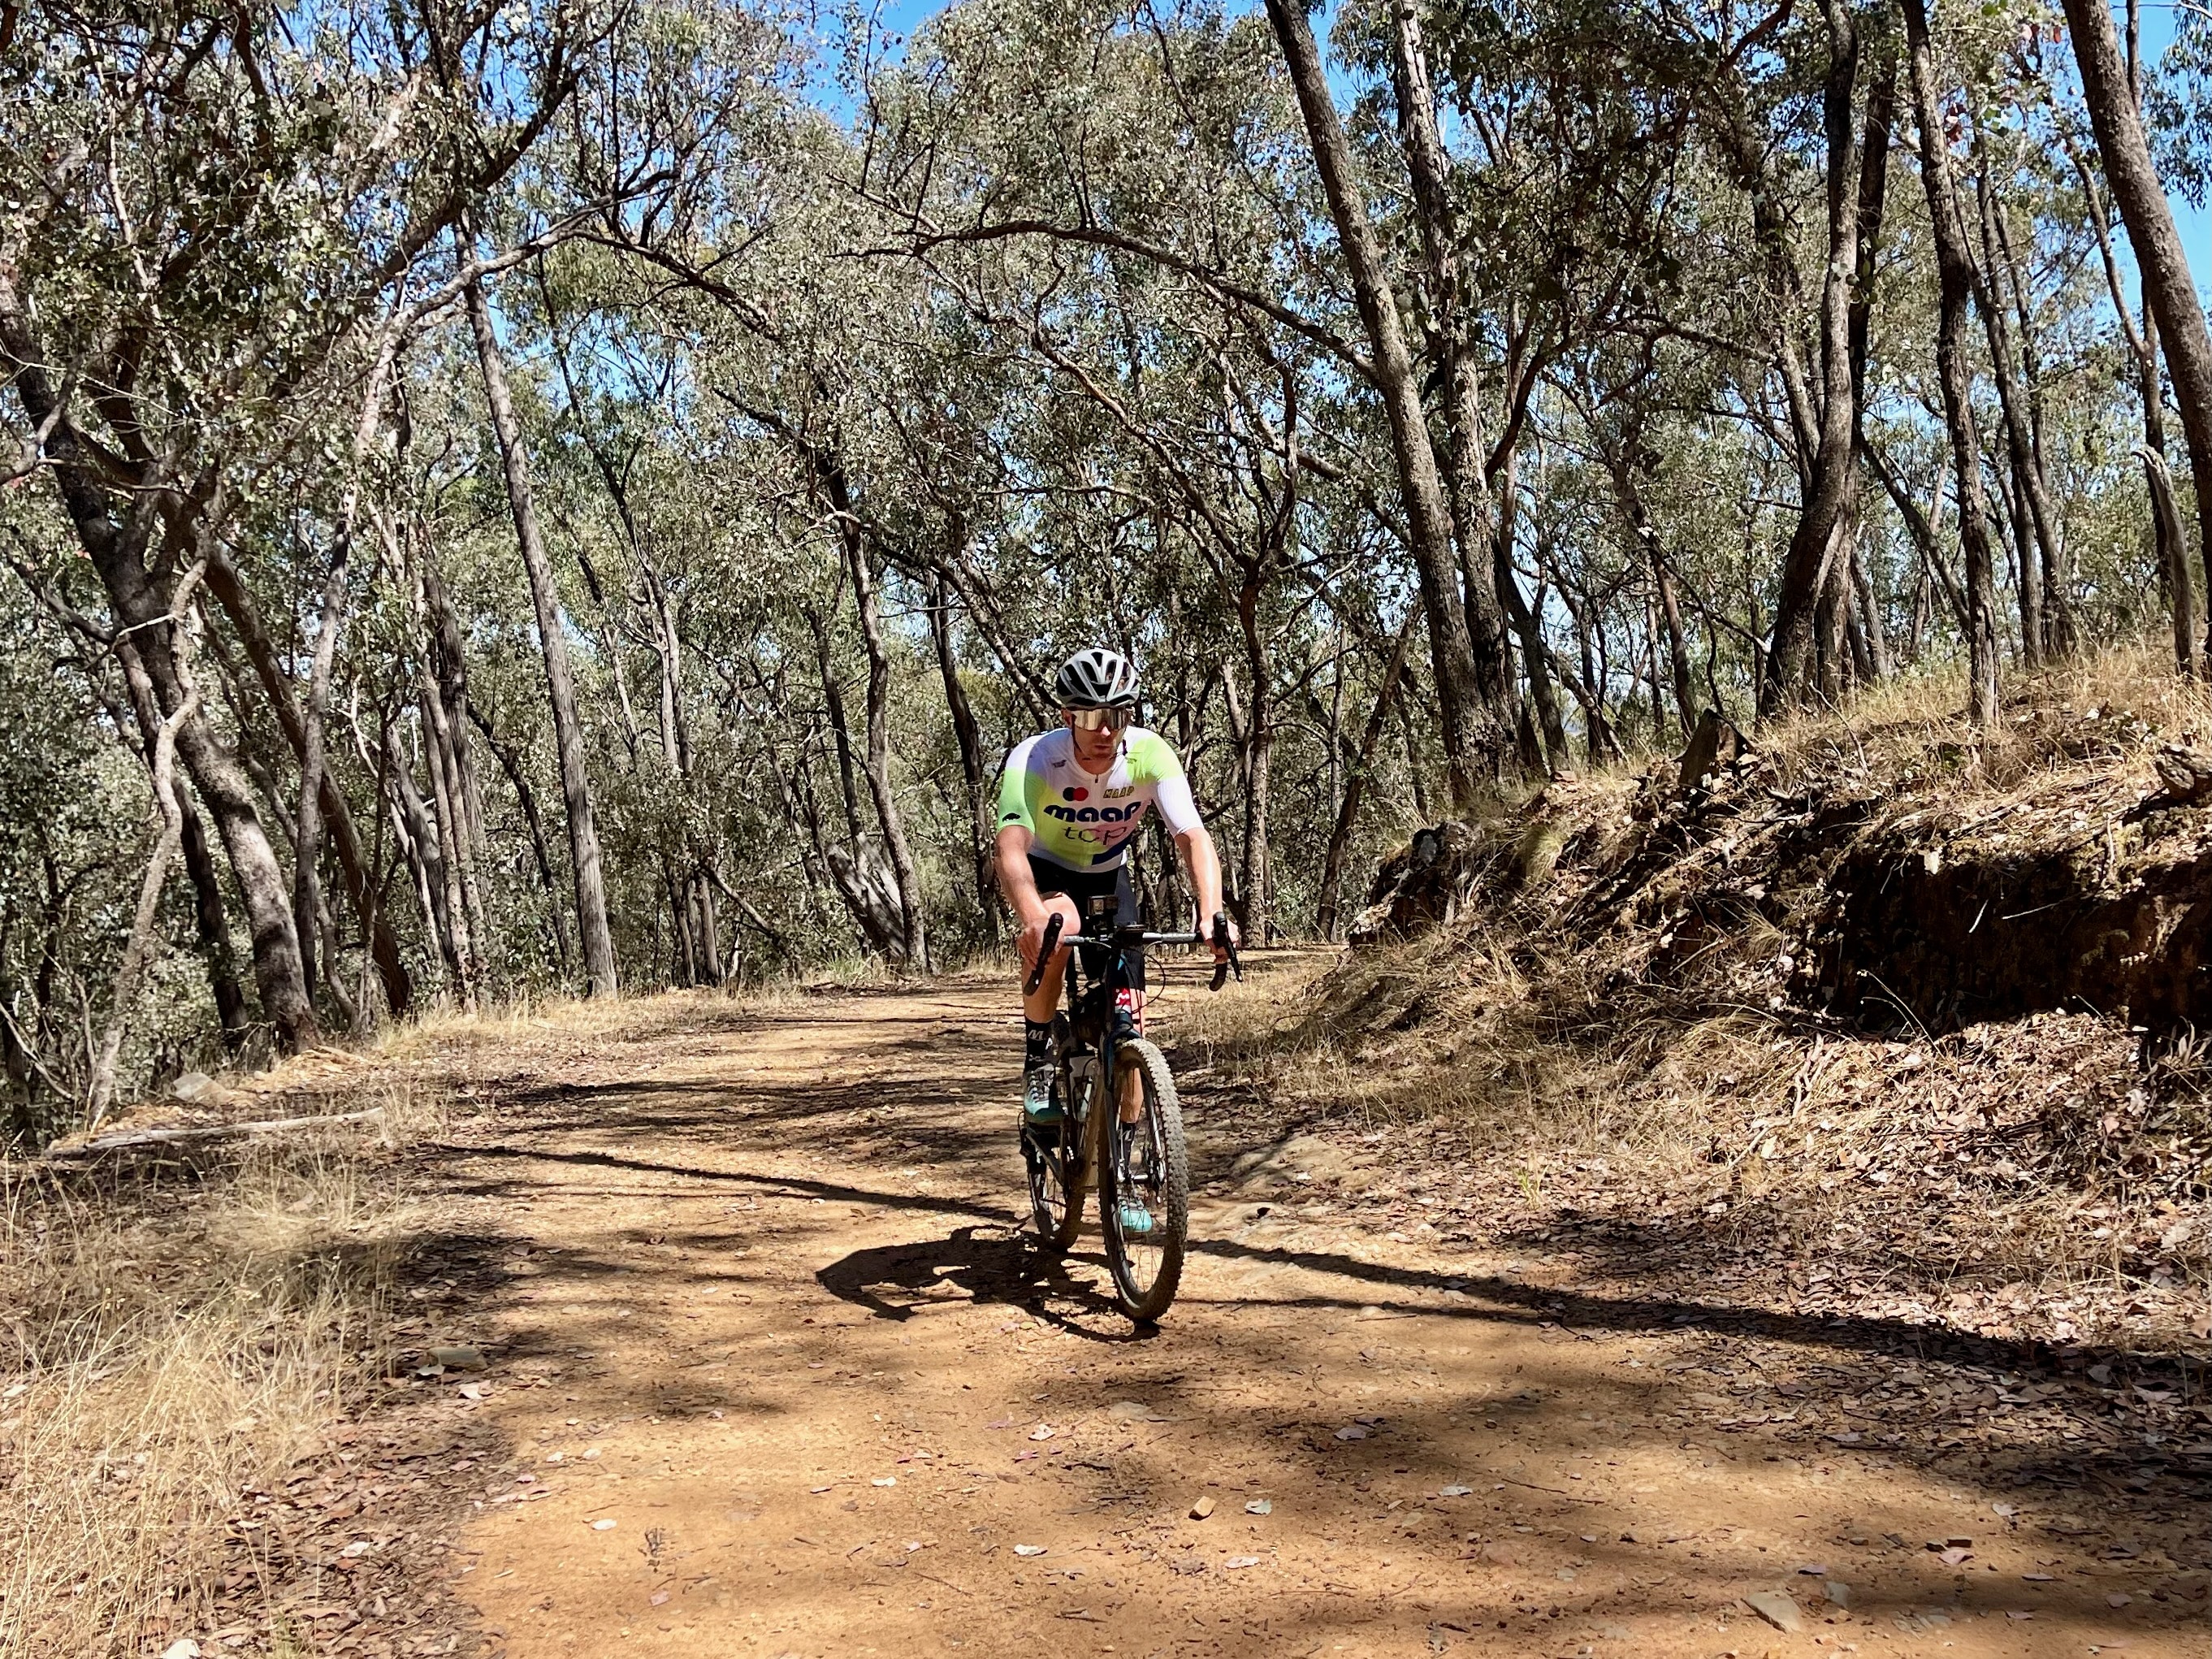 Cyclist descending on a dirt rod with native bushland in the background